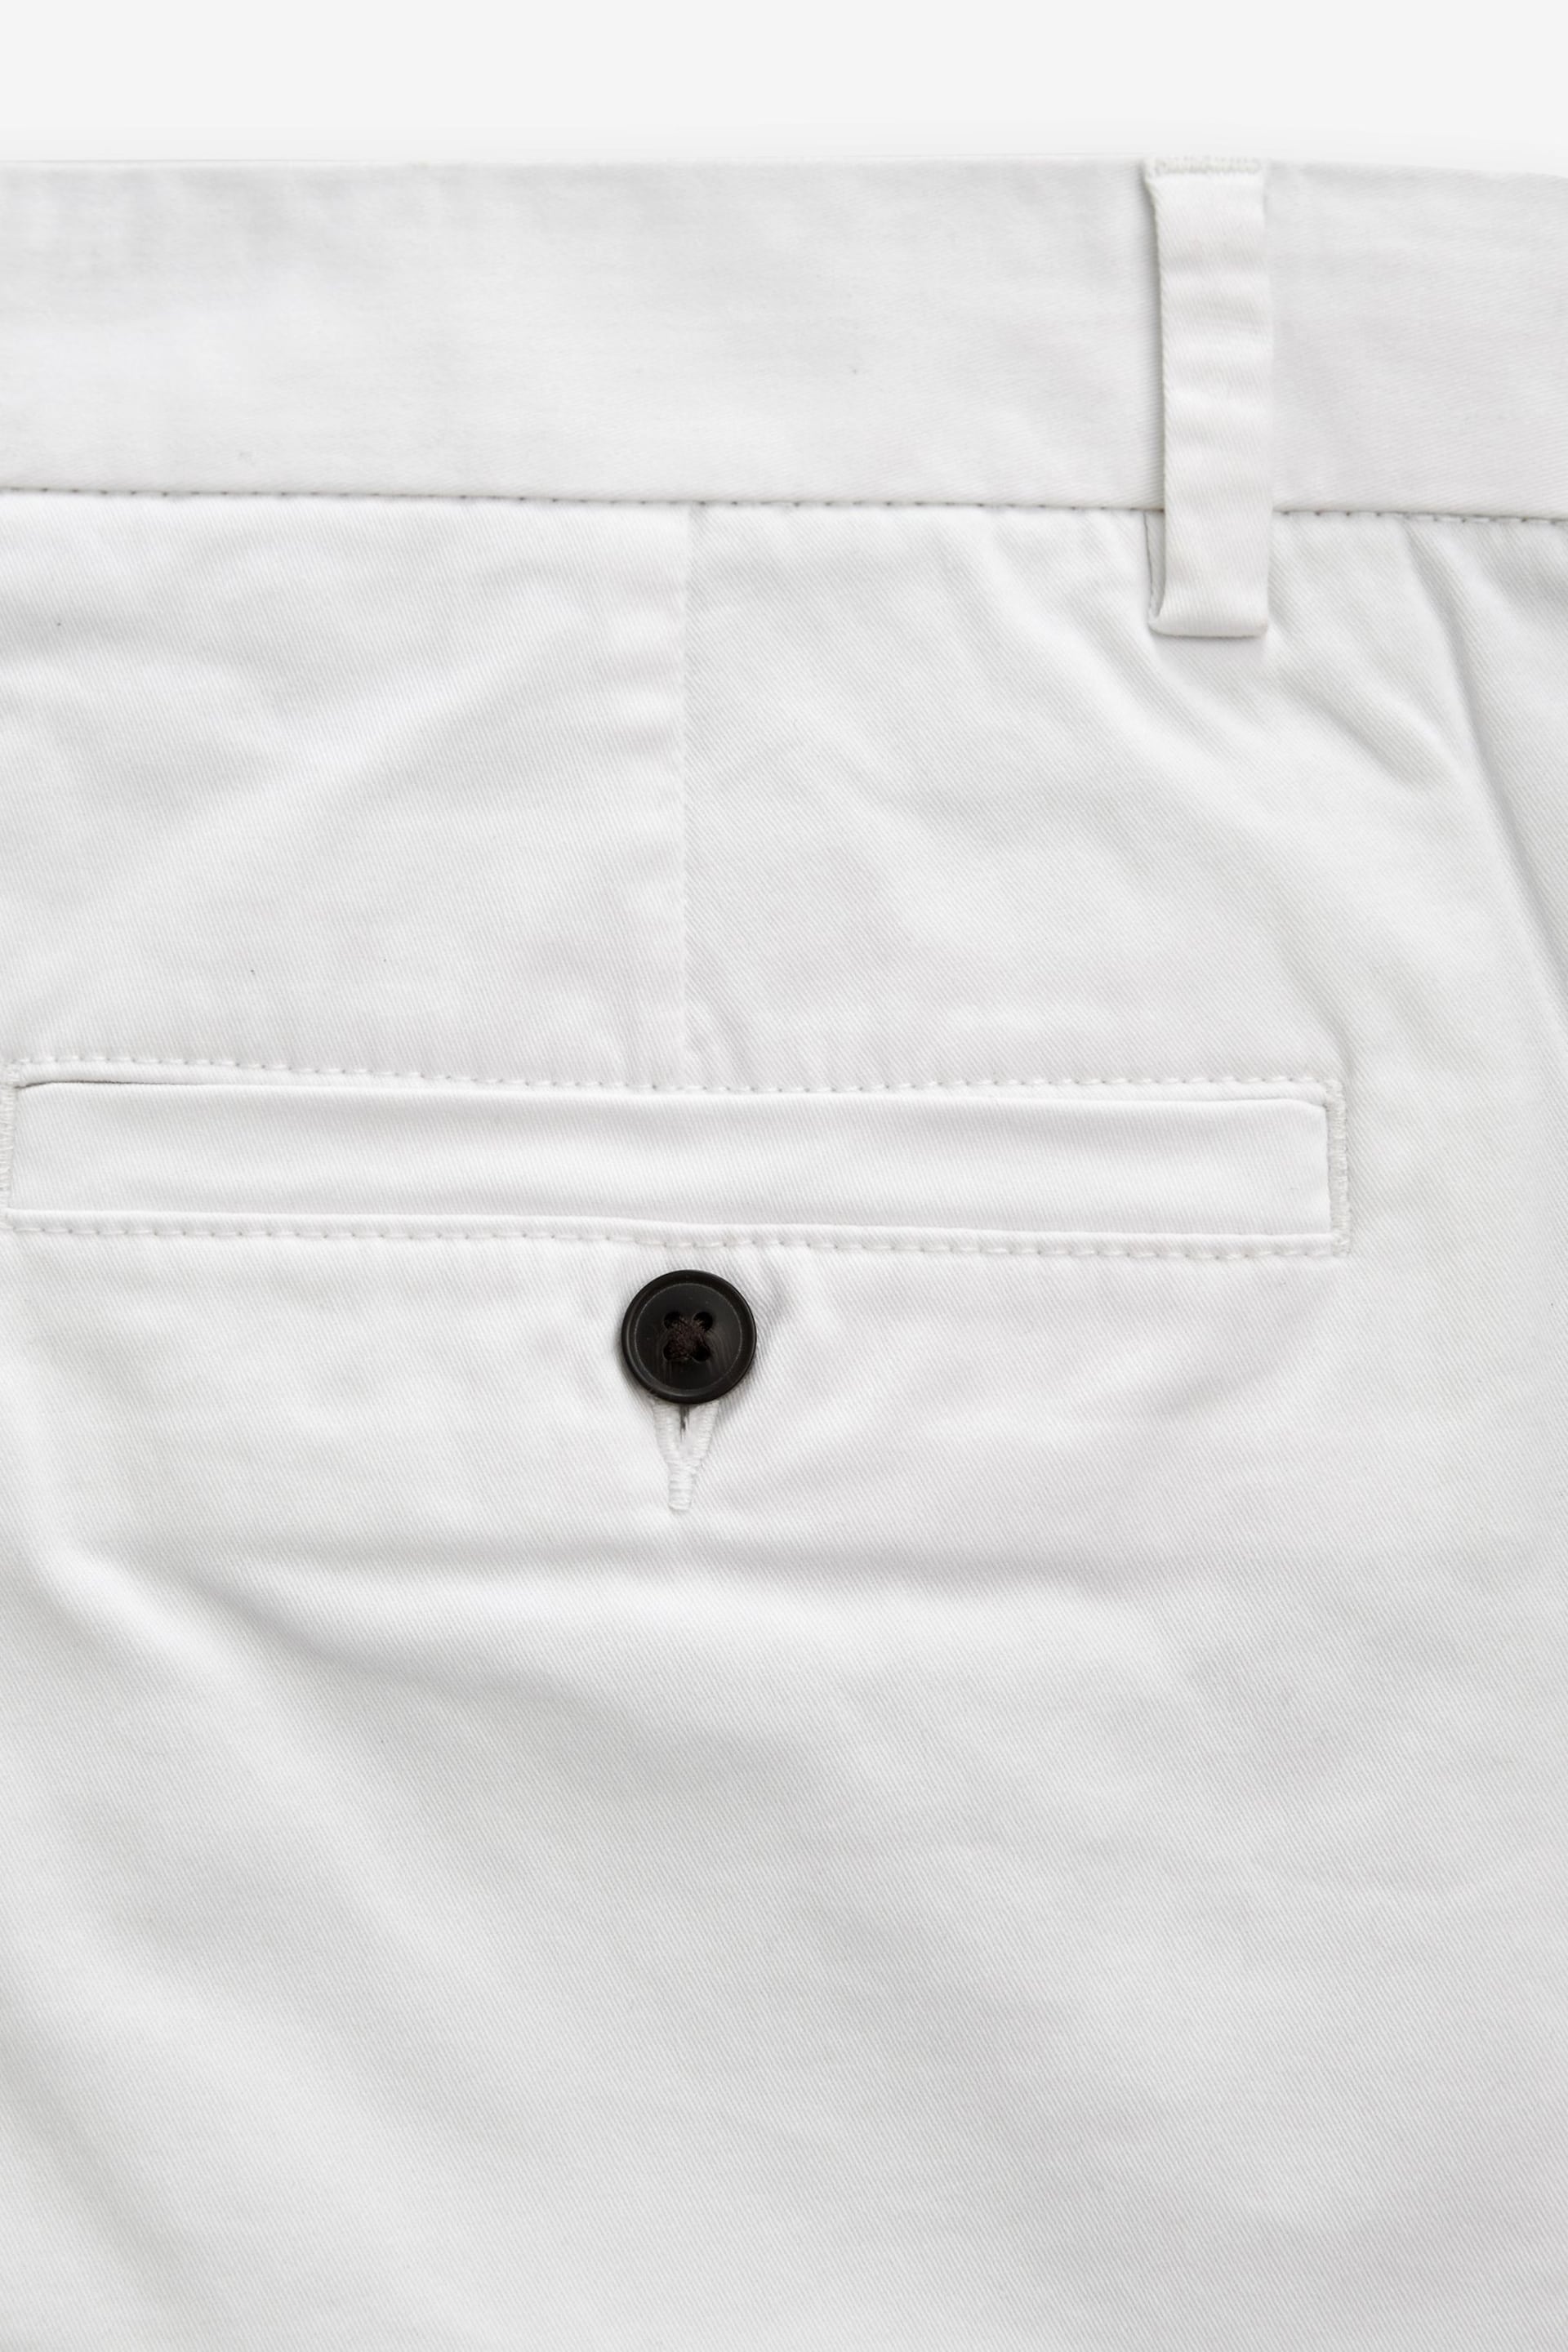 White Slim Fit Stretch Chinos Shorts - Image 6 of 8